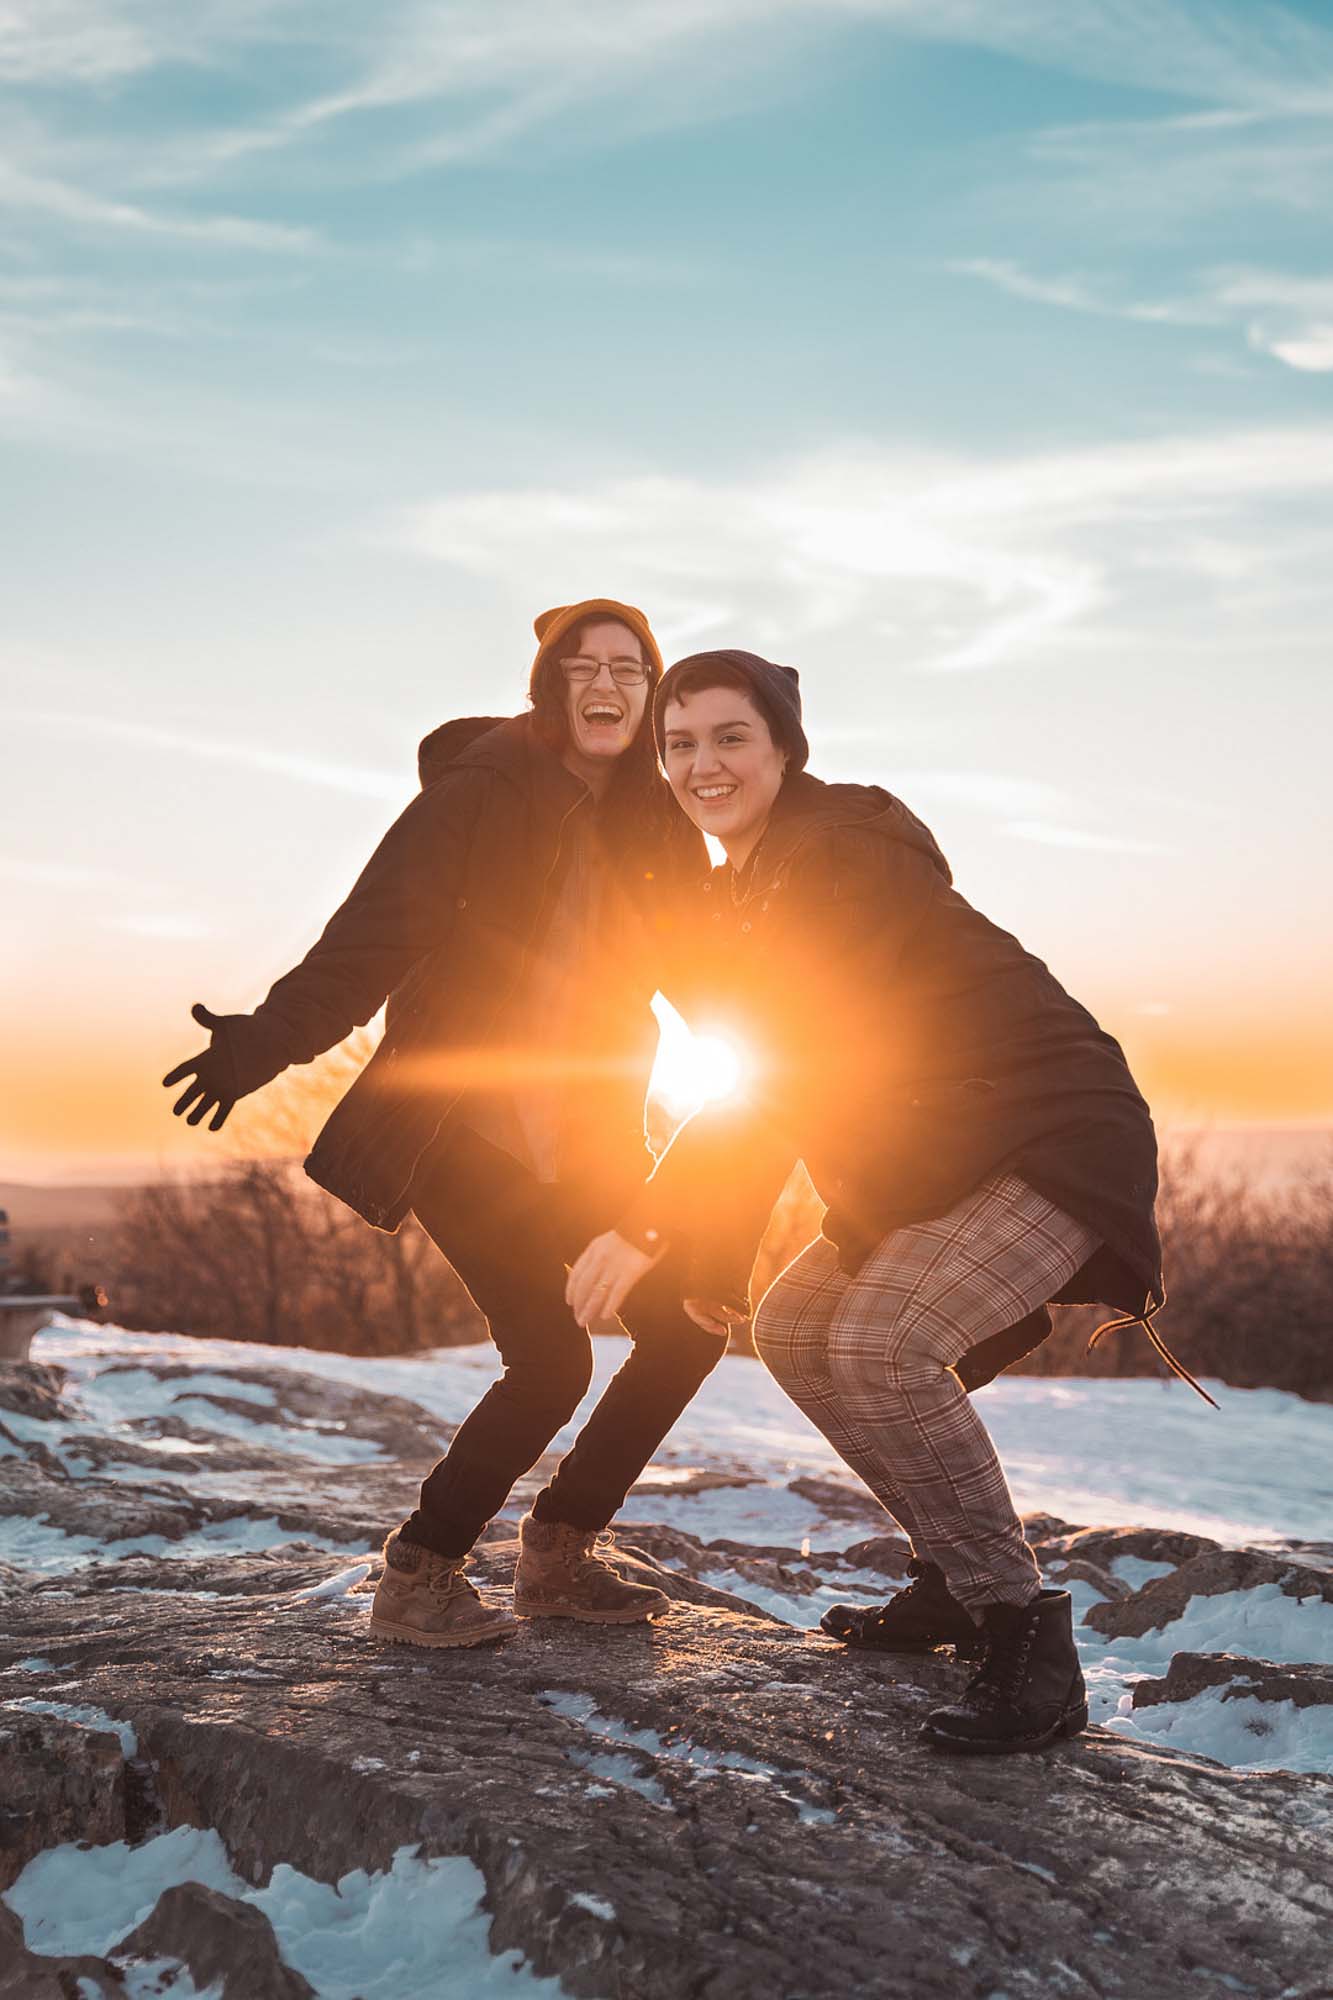 Winter wonderland engagement session at New Jersey's High Point State Park | Dawn Point Studios | Featured on Equally Wed, the leading LGBTQ+ wedding magazine